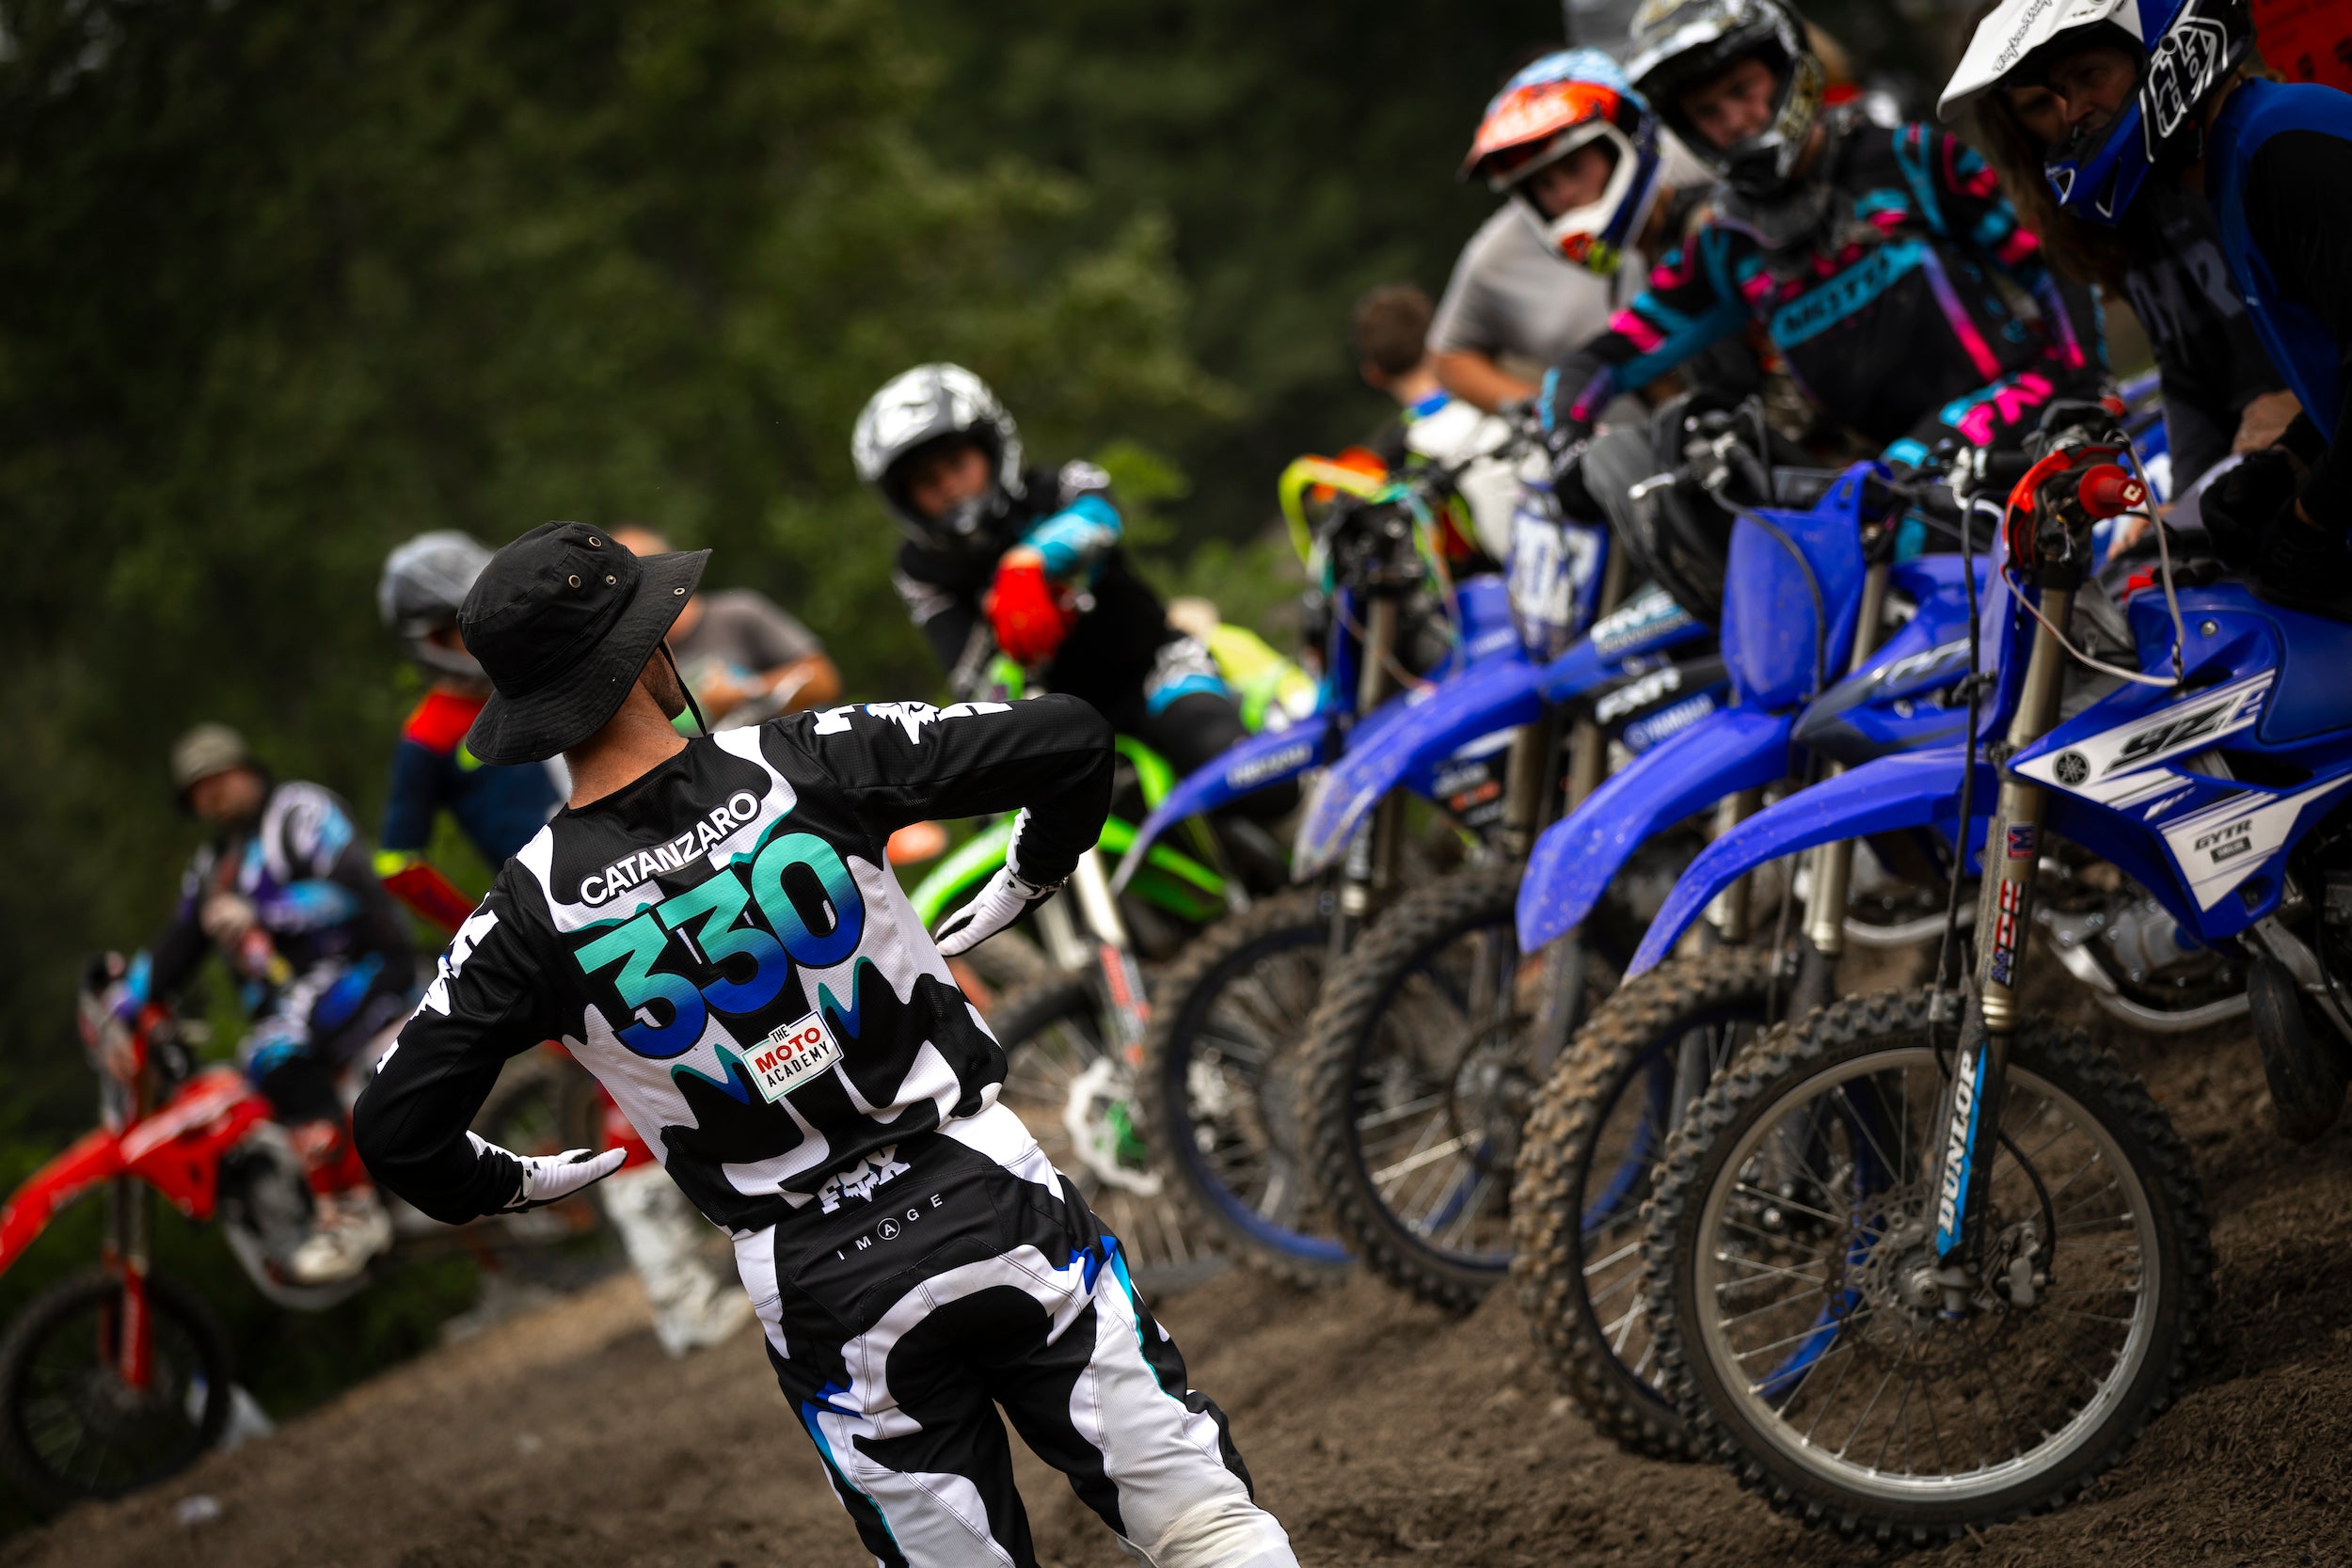 How to Select a Starting Gate in Motocross: Part 1 of 4